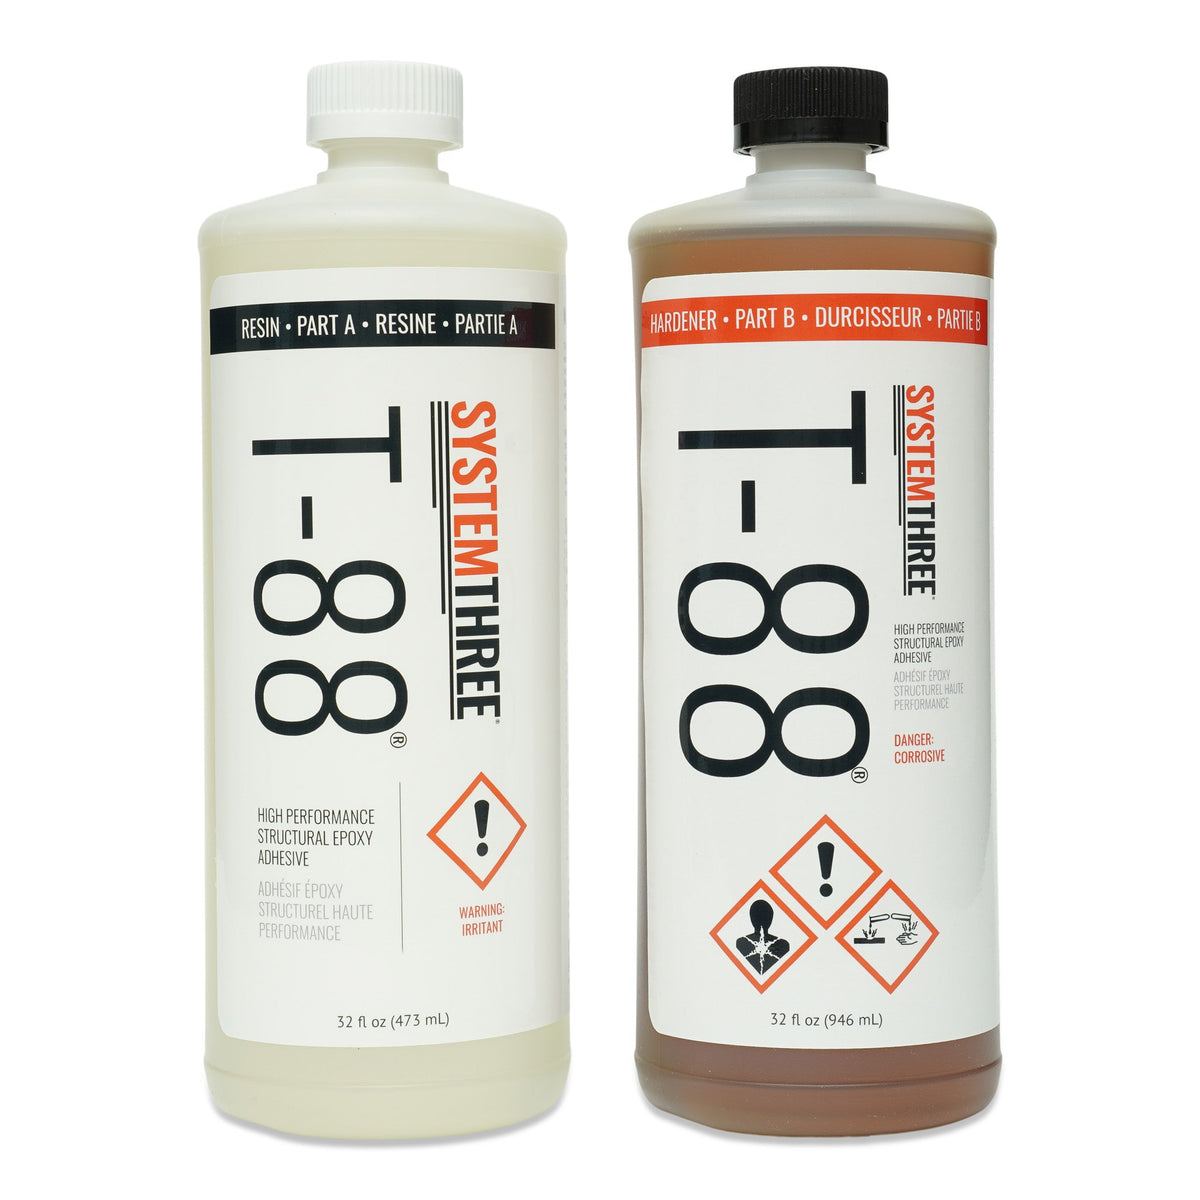 T-88  Structural Epoxy Adhesive - System Three Resins